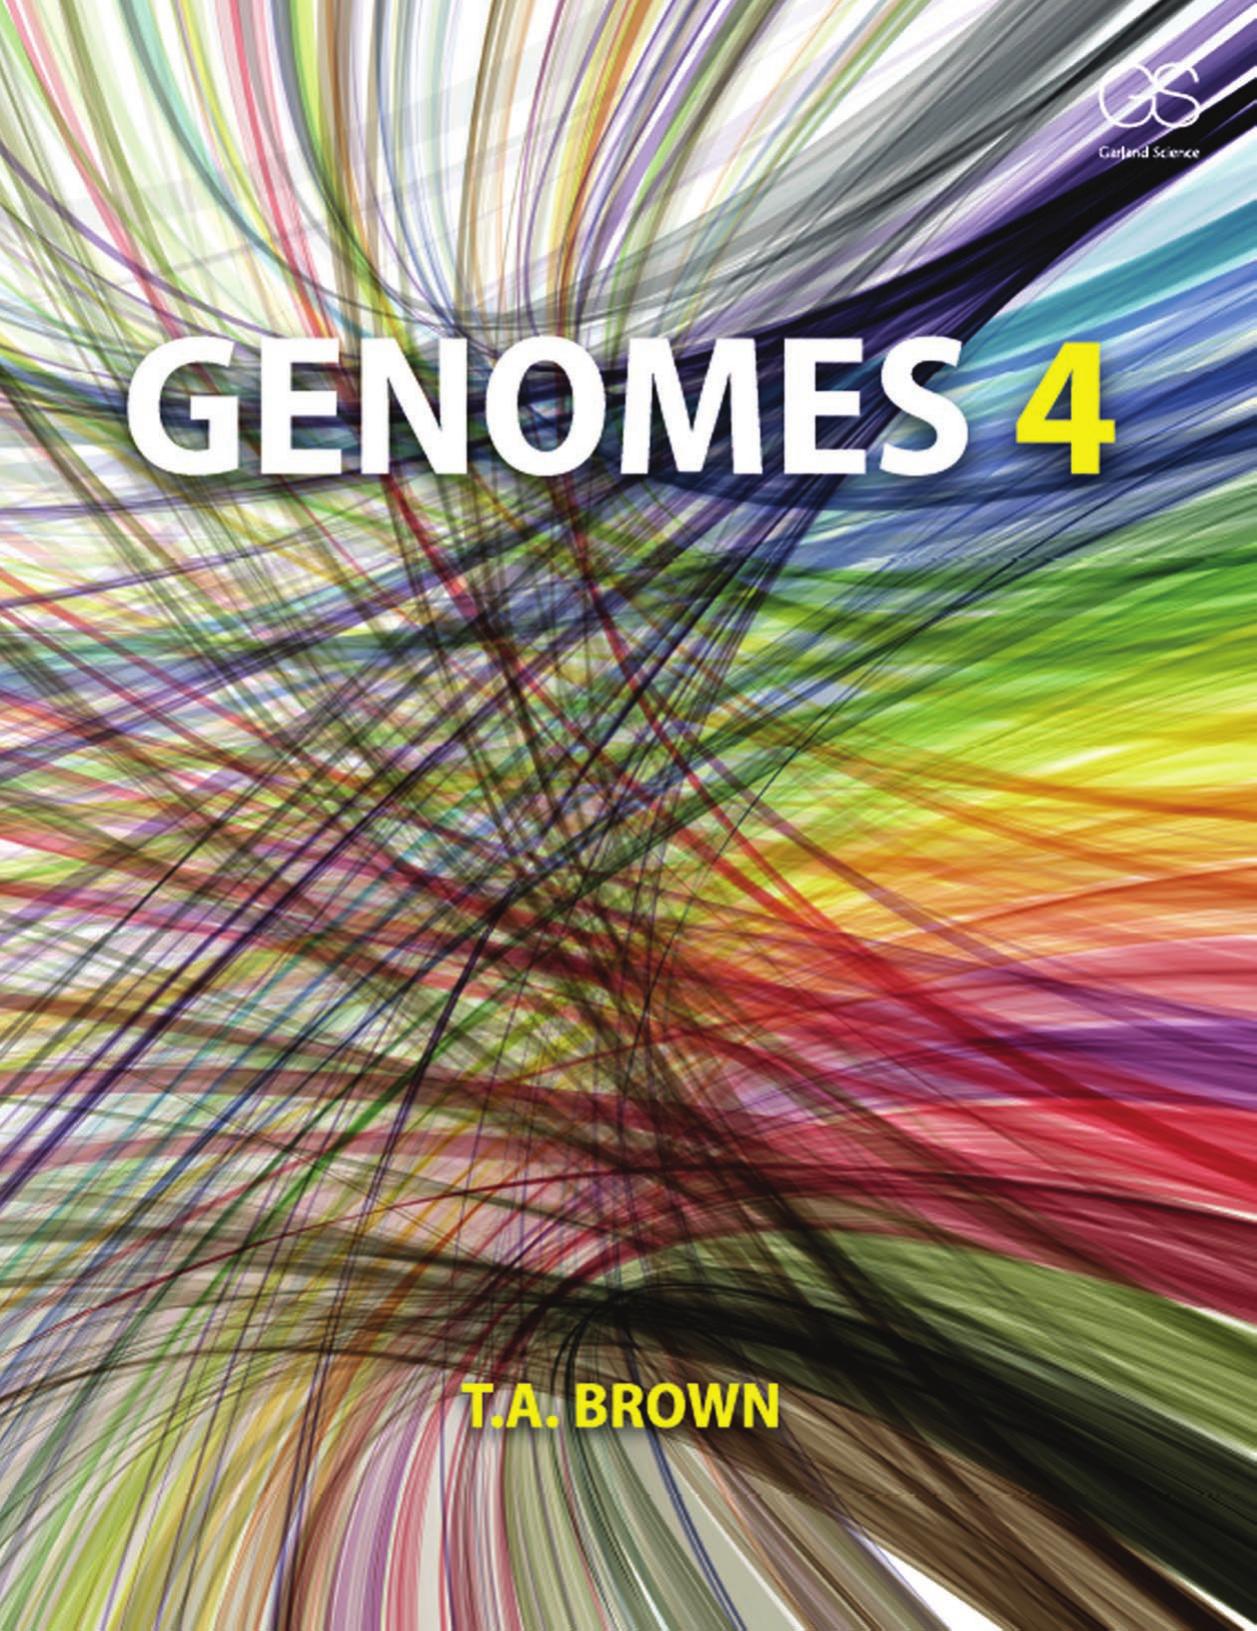 Genomes 4th by T.A. Brown - T.A. BROWN.jpg